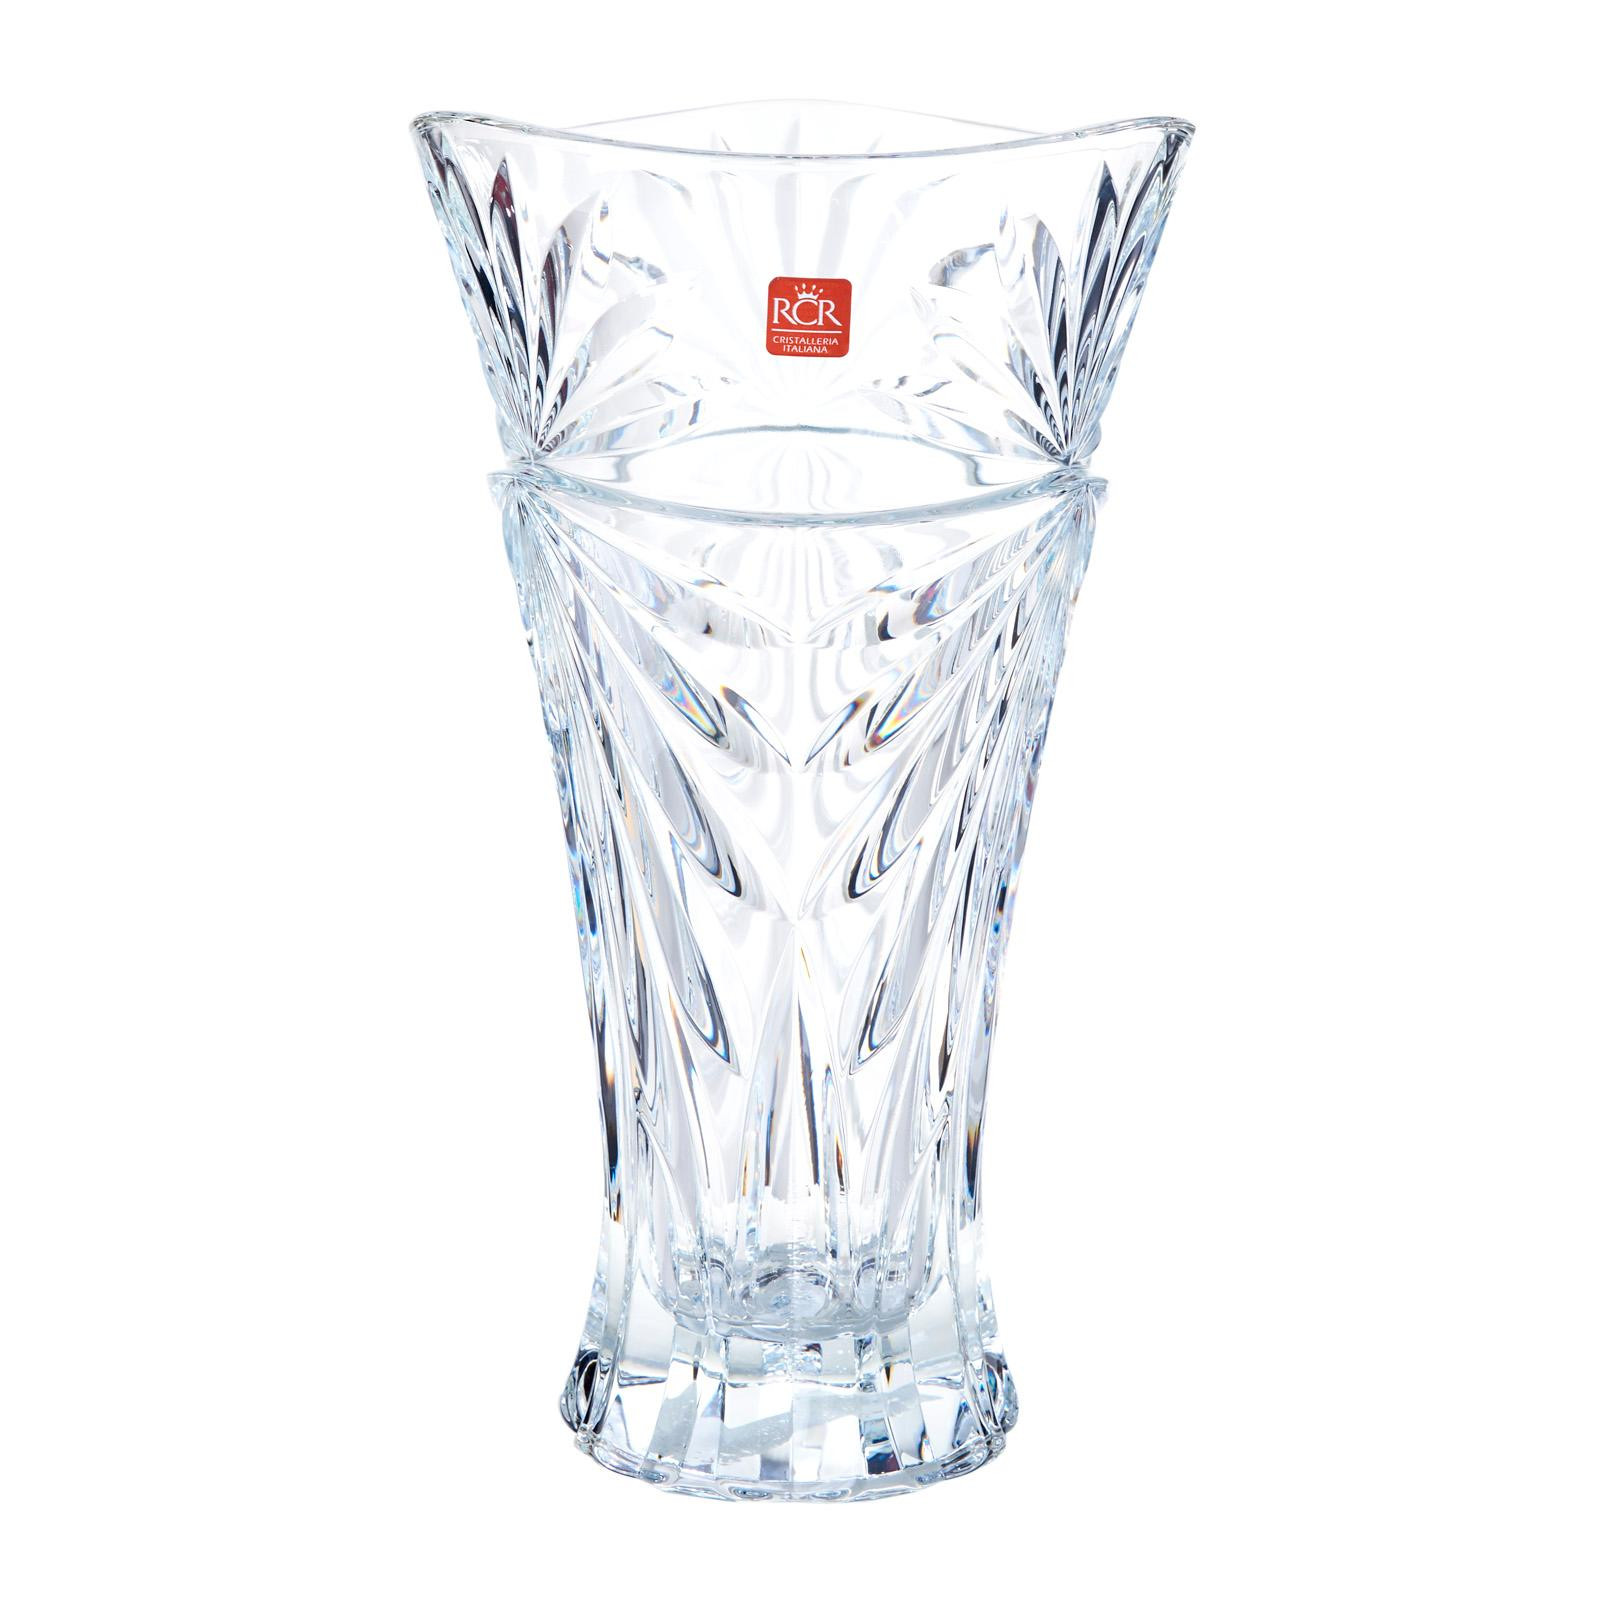 rcr crystal vase price of rcr oasis 300mm vase 0 from redmart intended for save to my list